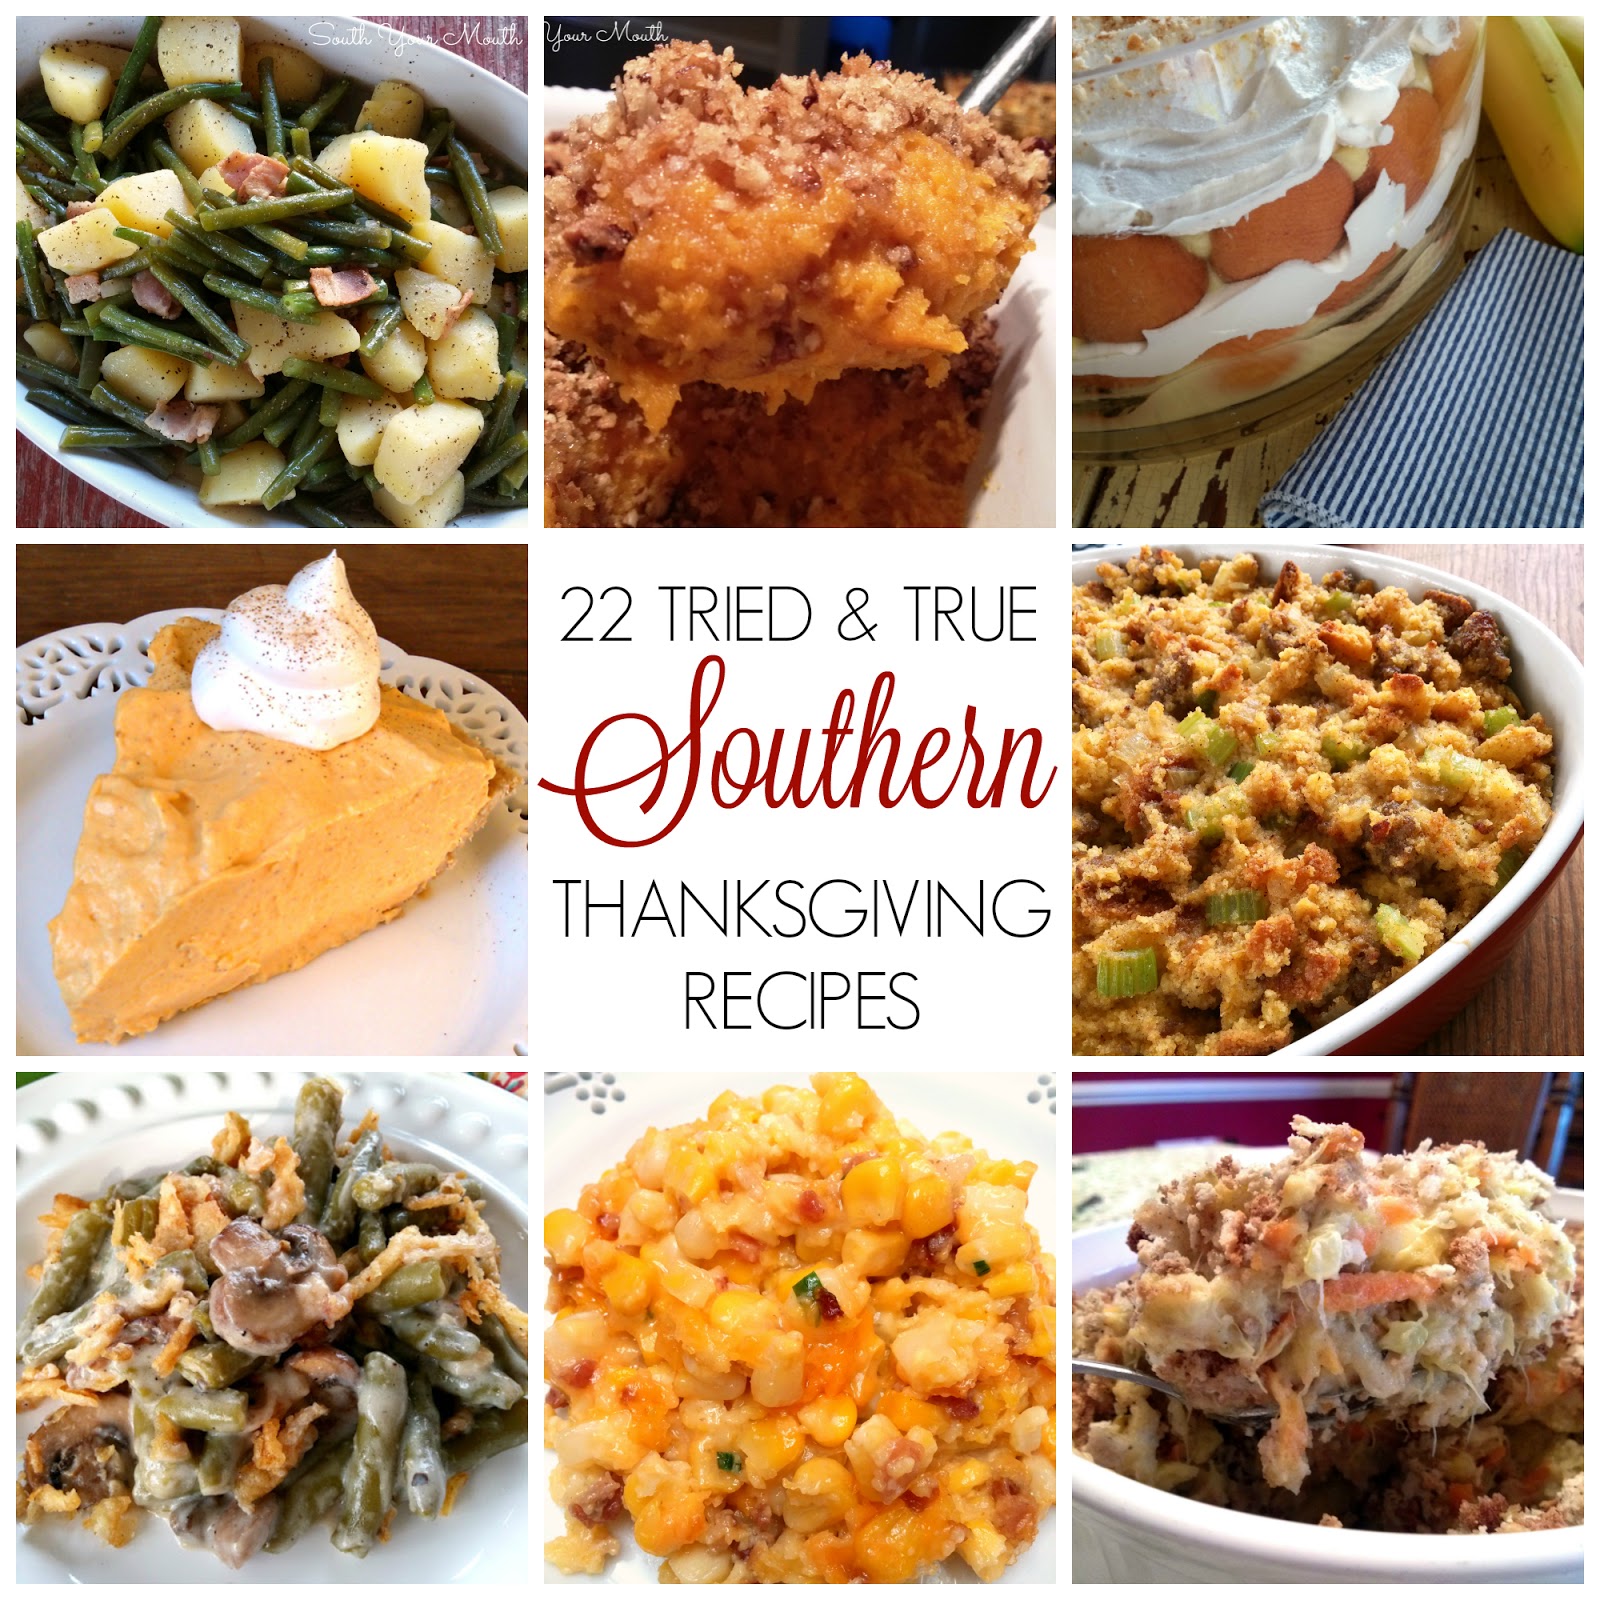 Deep South Dish: Southern Thanksgiving Dinner Classics